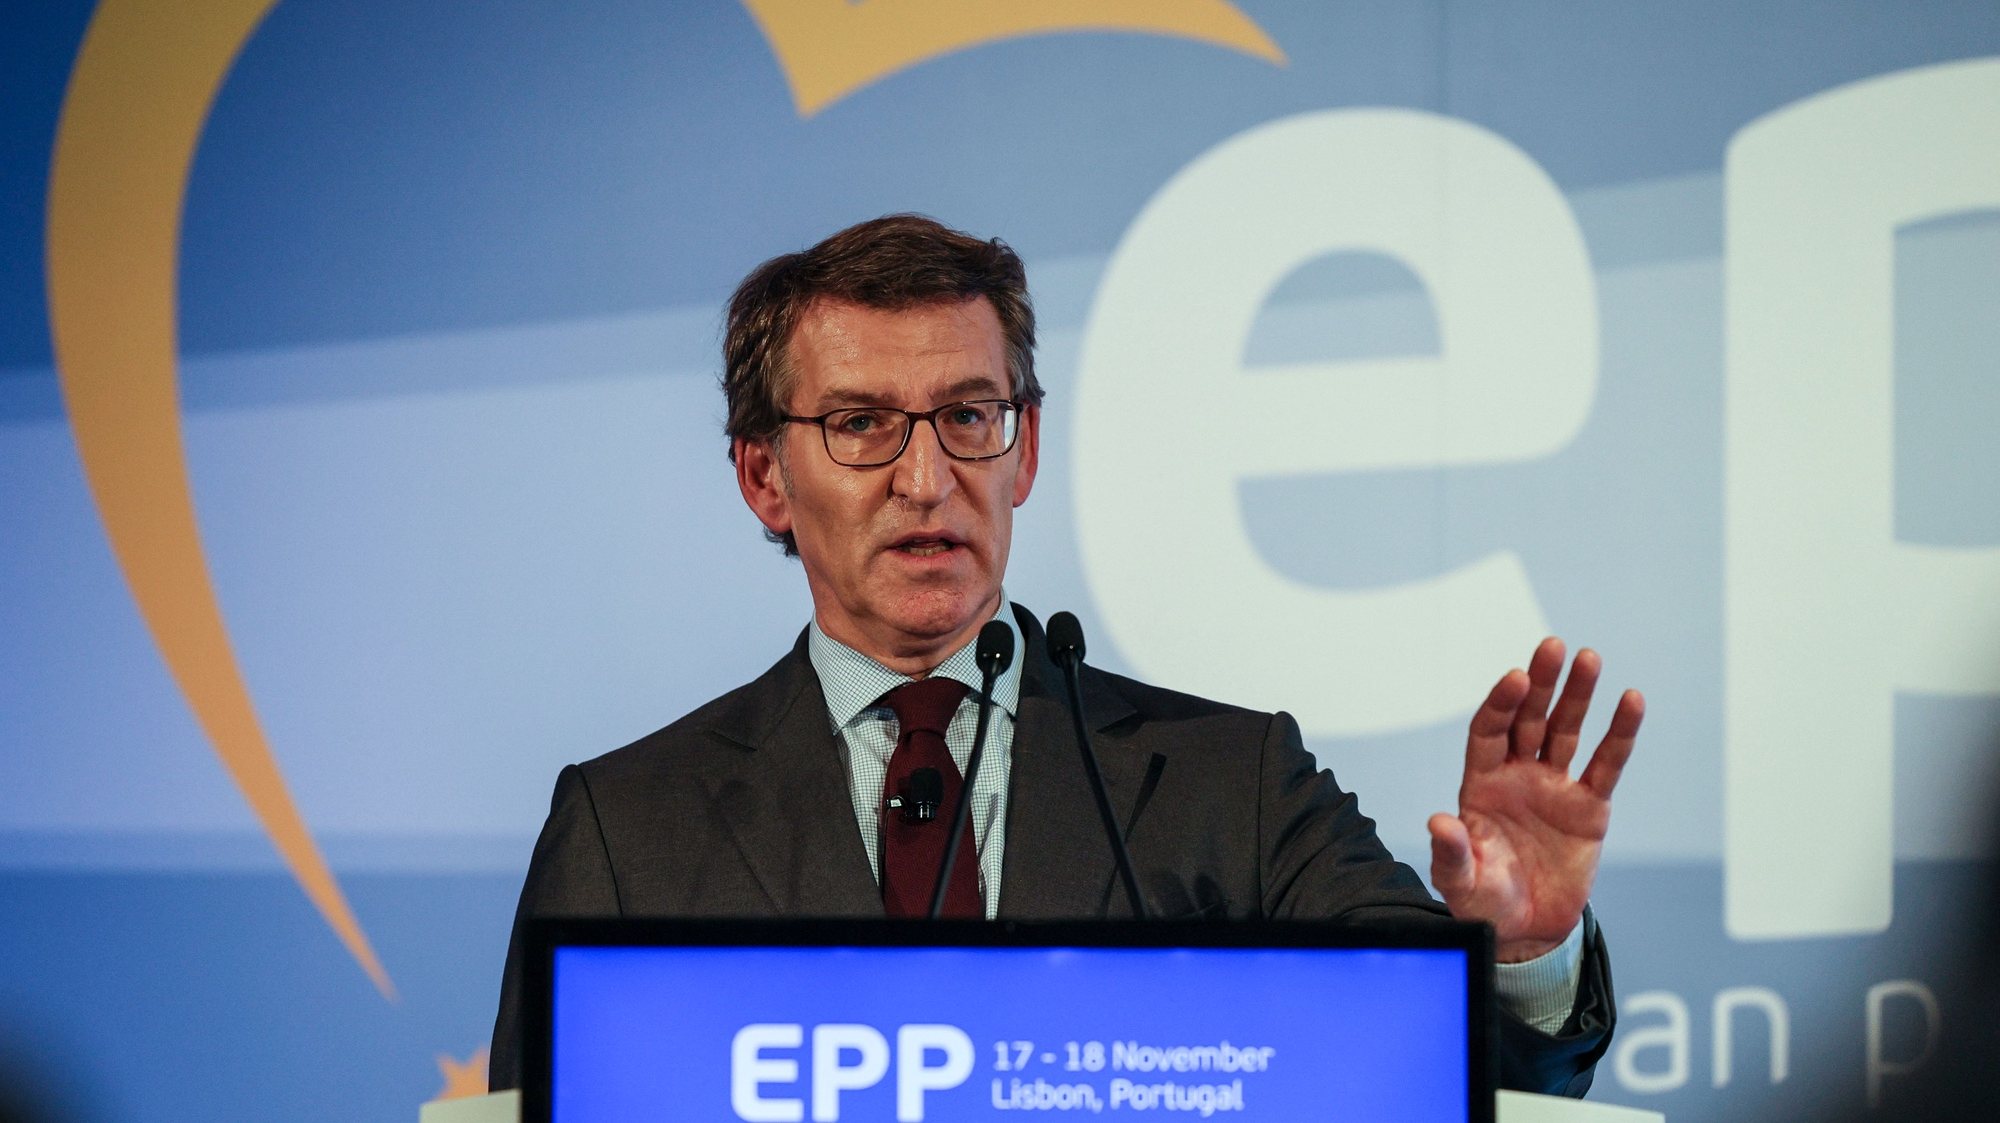 President of PP Alberto Nunez Feijoo speaks during the first day of the Political Assembly of the European People&#039;s Party in Lisbon, Portugal, 17 November 2022. The EPP Political Assembly is organized by the European People&#039;s Party (EPP), the political family of the Christian Democrats in Europe, and takes place in Lisbon from 17 to 18 November 2022. MANUEL DE ALMEIDA/LUSA